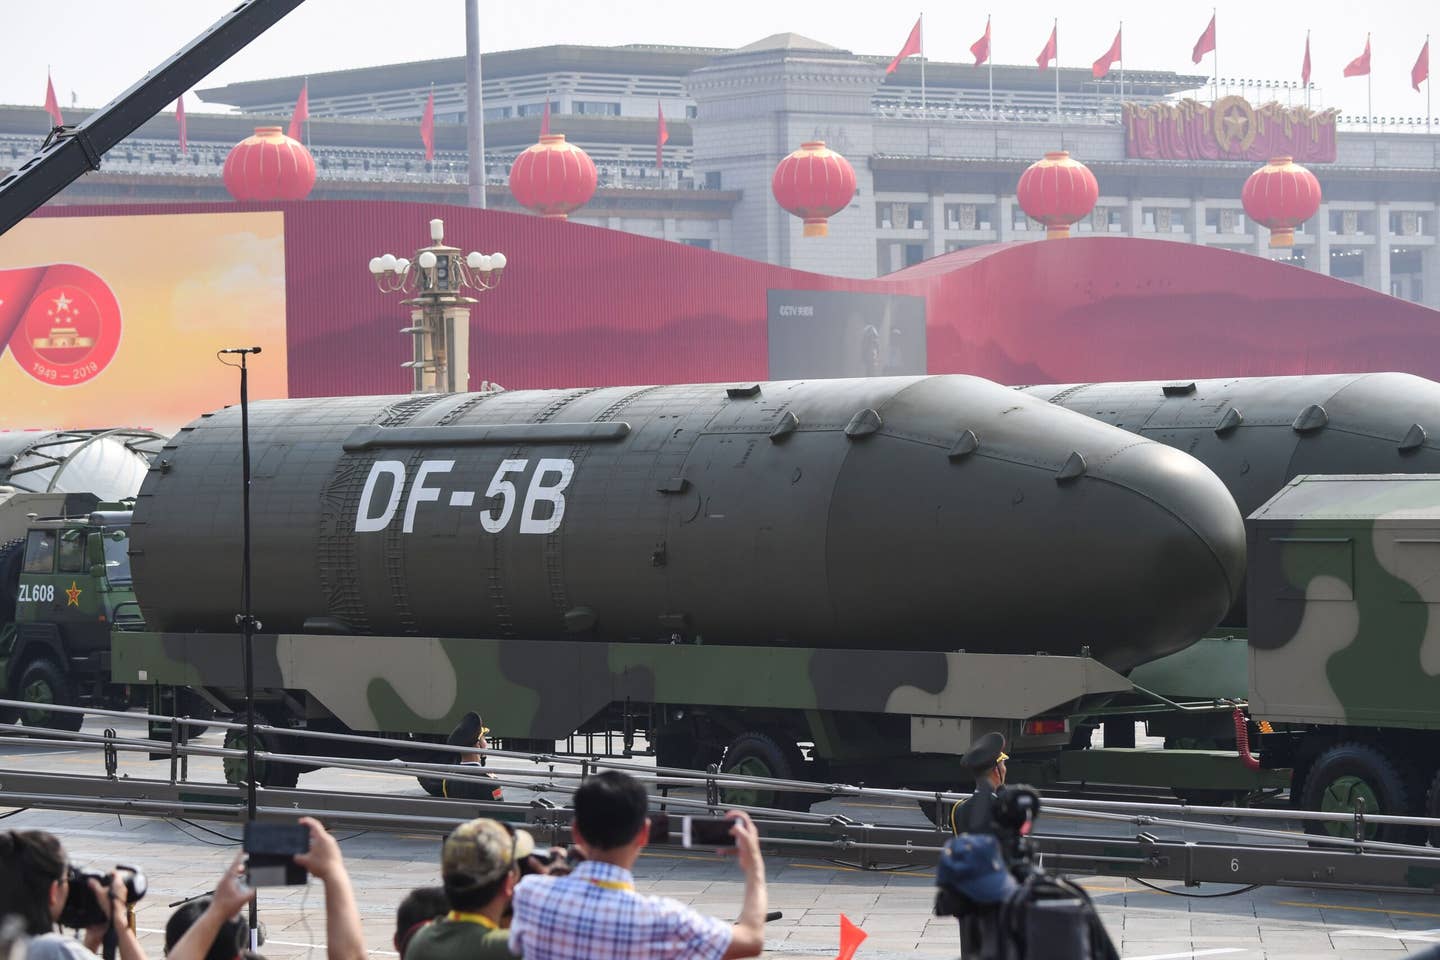 Military vehicles carrying DF-5B ICBMs participate in a military parade at Tiananmen Square in Beijing on October 1, 2019. <em>Credit: Photo by GREG BAKER/AFP</em>